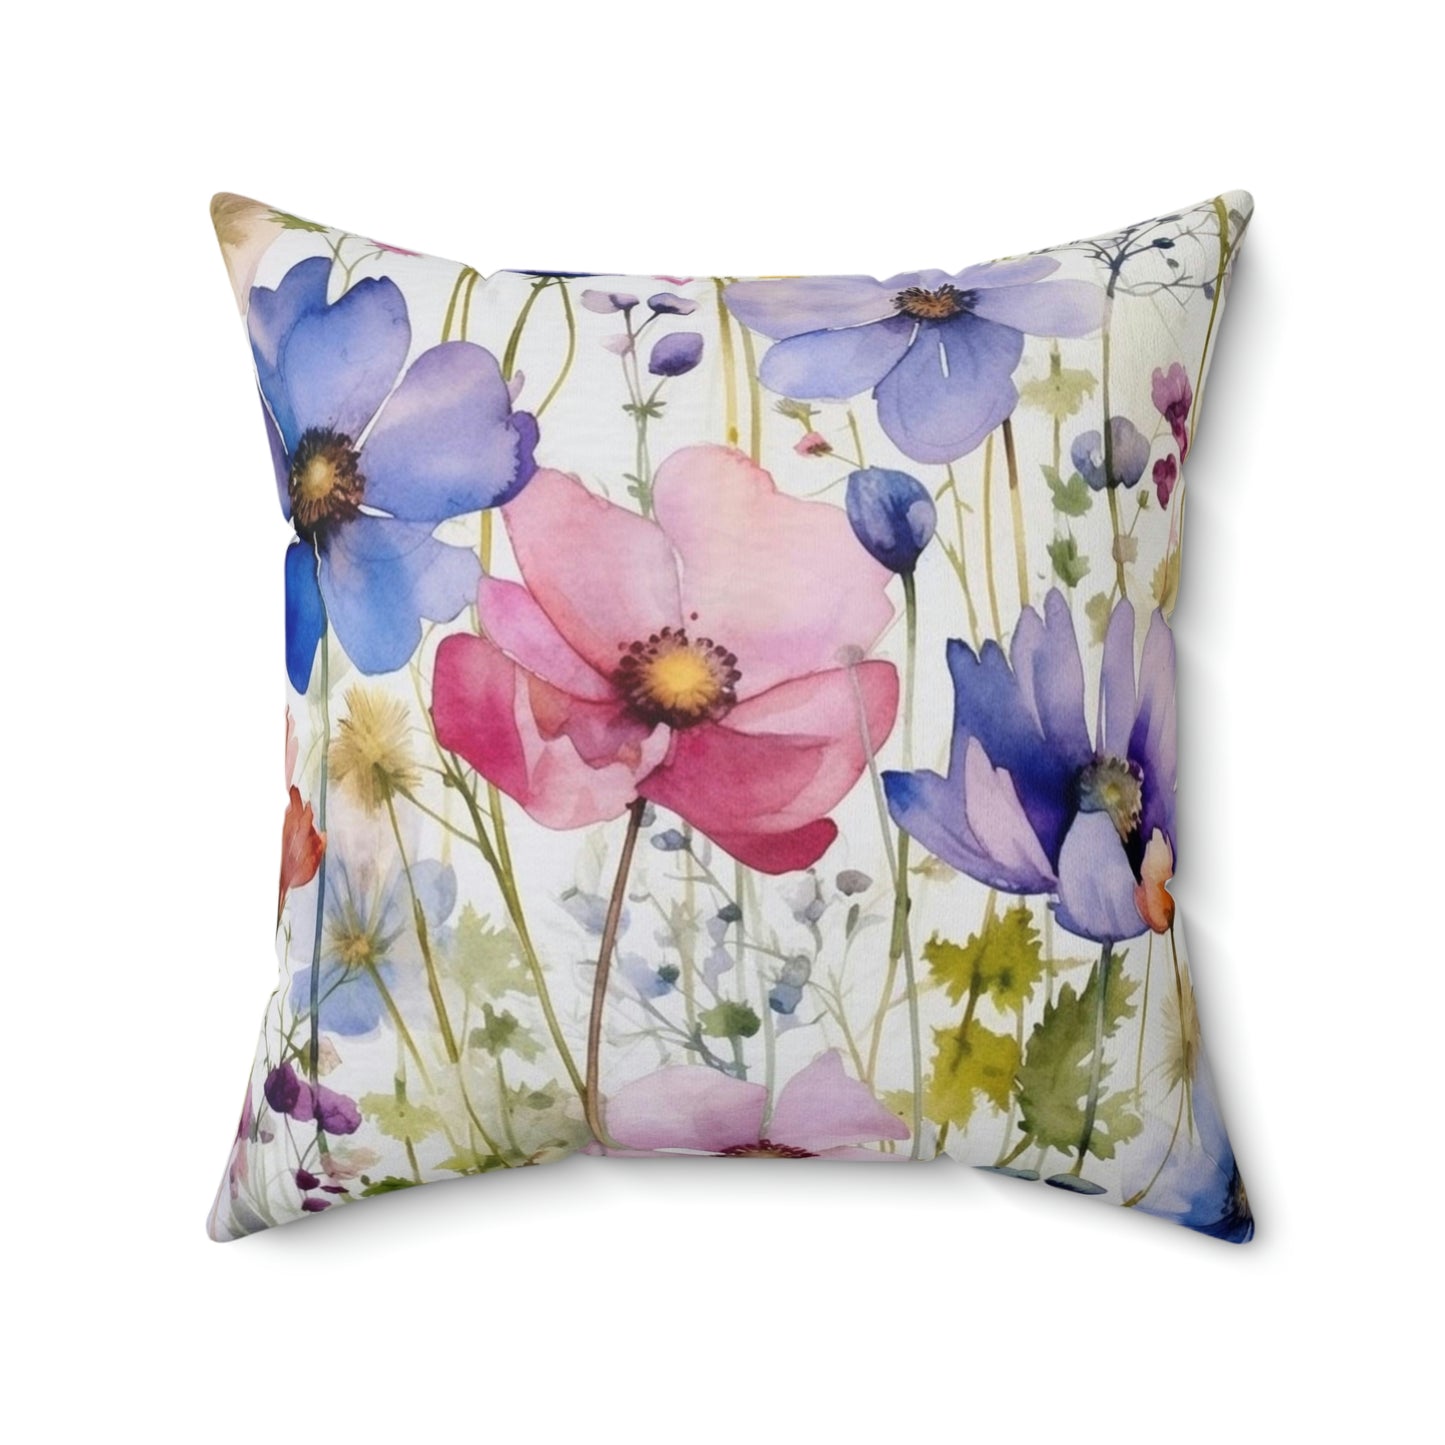 Wildflowers Filled Pillow with Insert, Watercolor Floral Square Throw Accent Decorative Room Decor Floor Sofa Couch Cushion